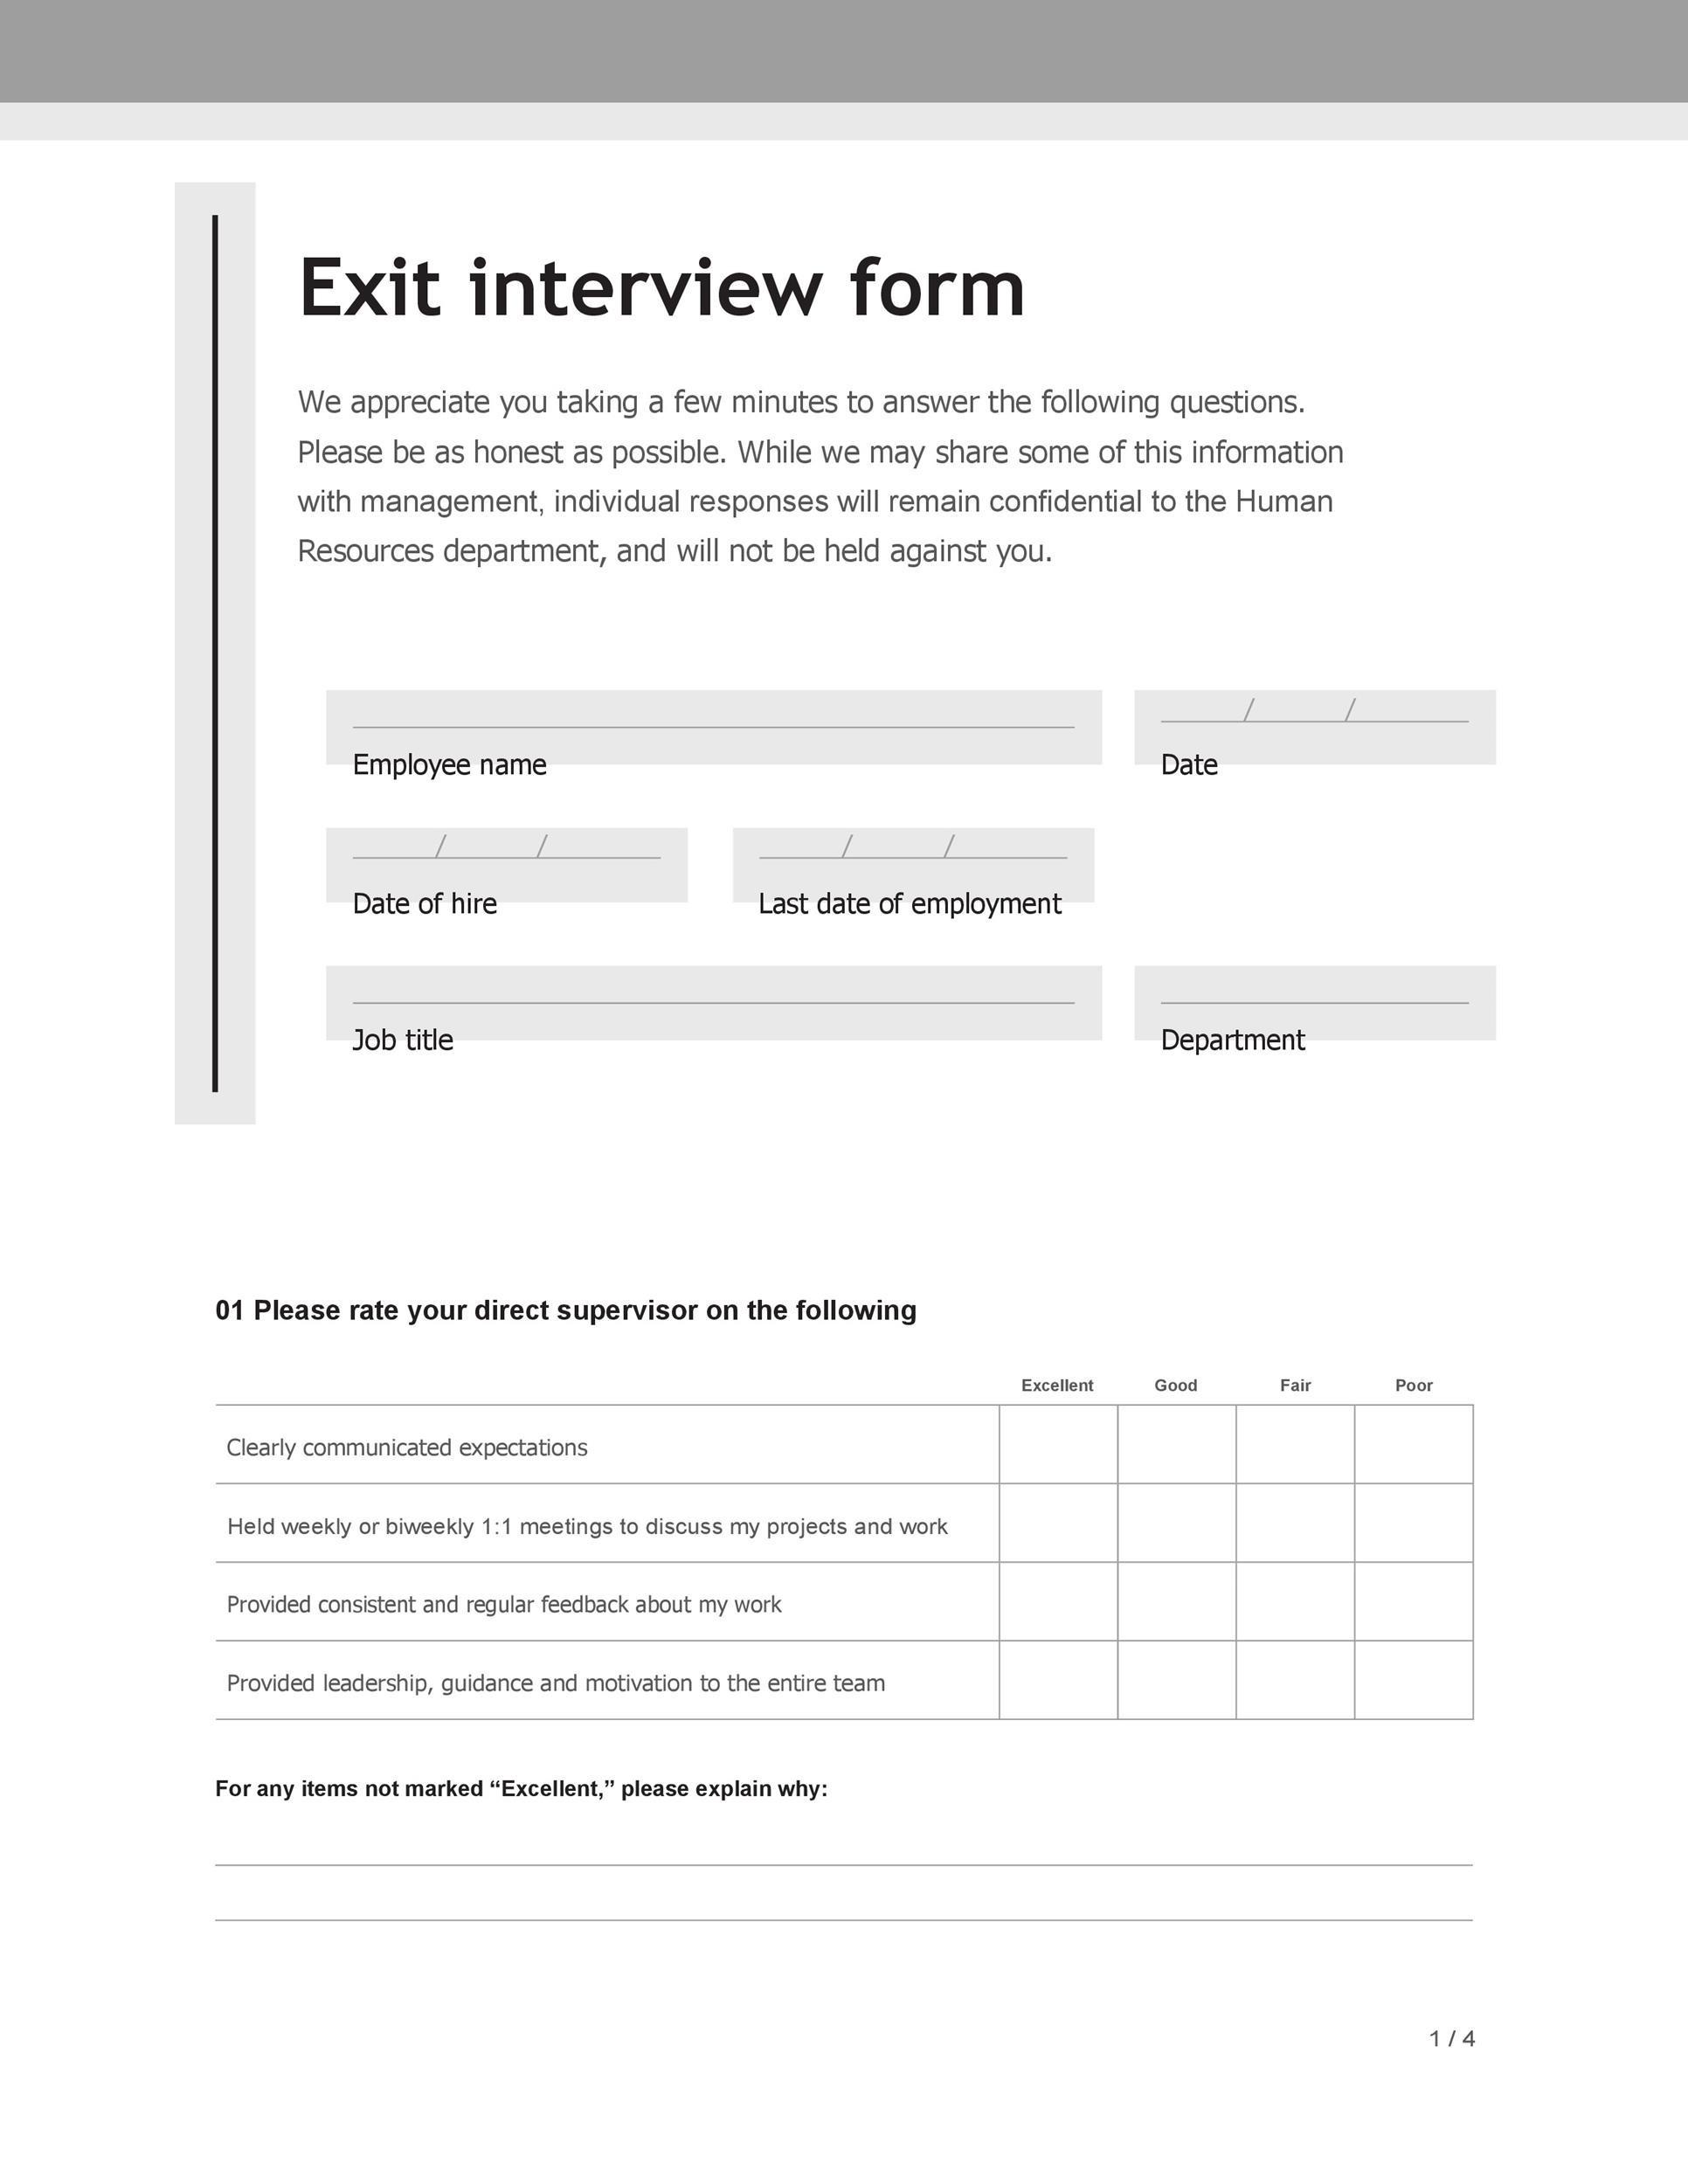 Free exit interview template 02